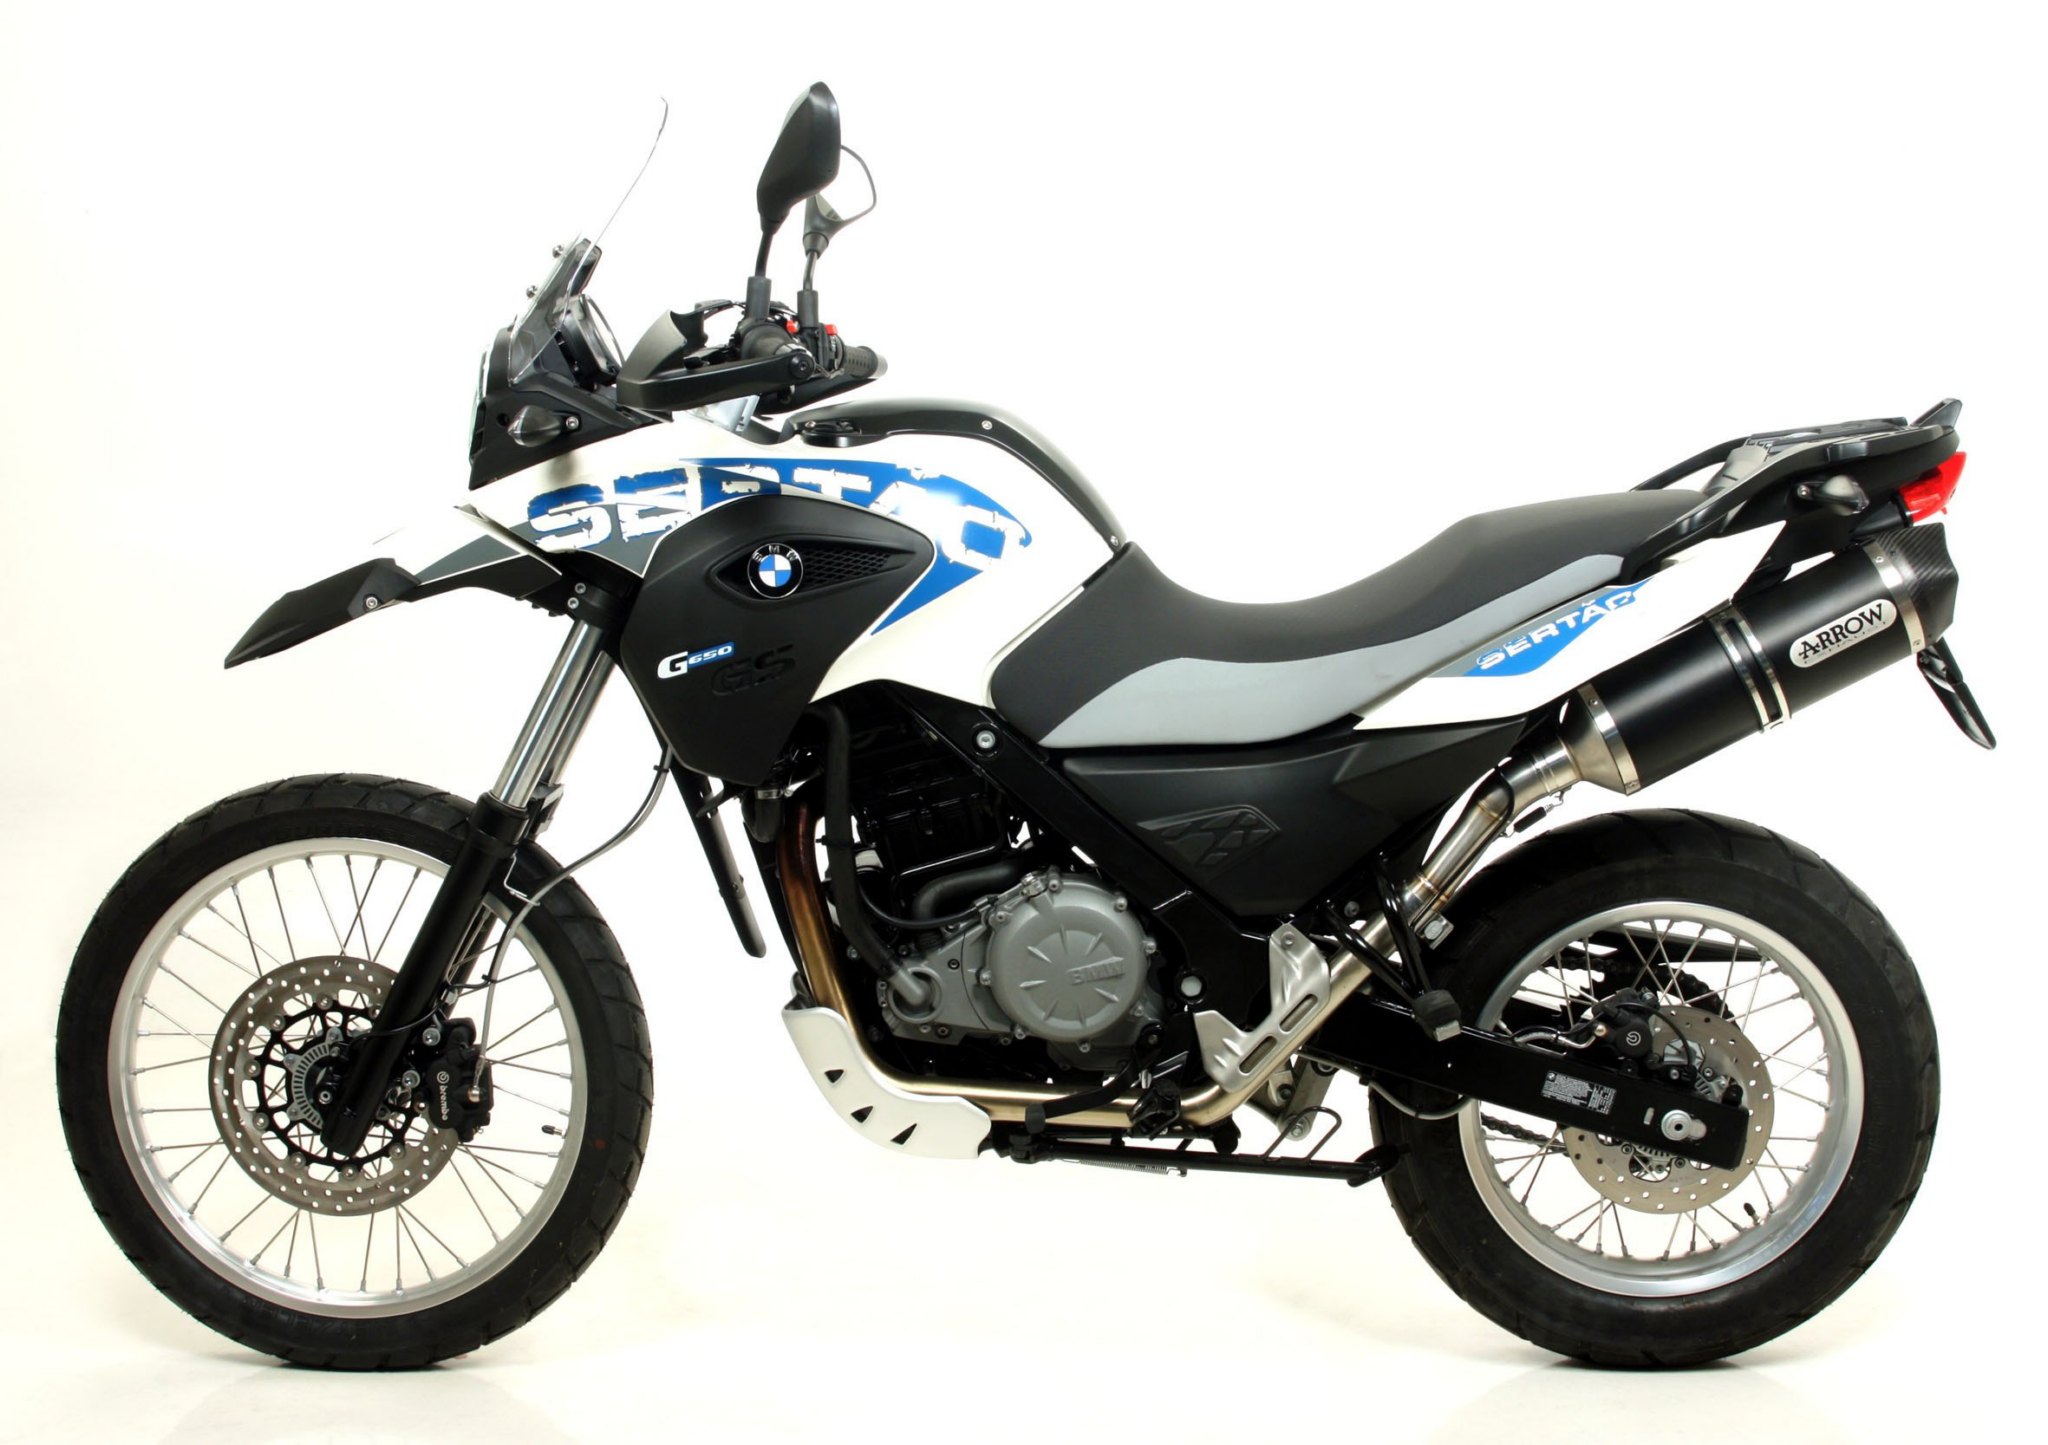 BMW G650GS Sertao and F700GS Receive New Arrow Exhausts - autoevolution